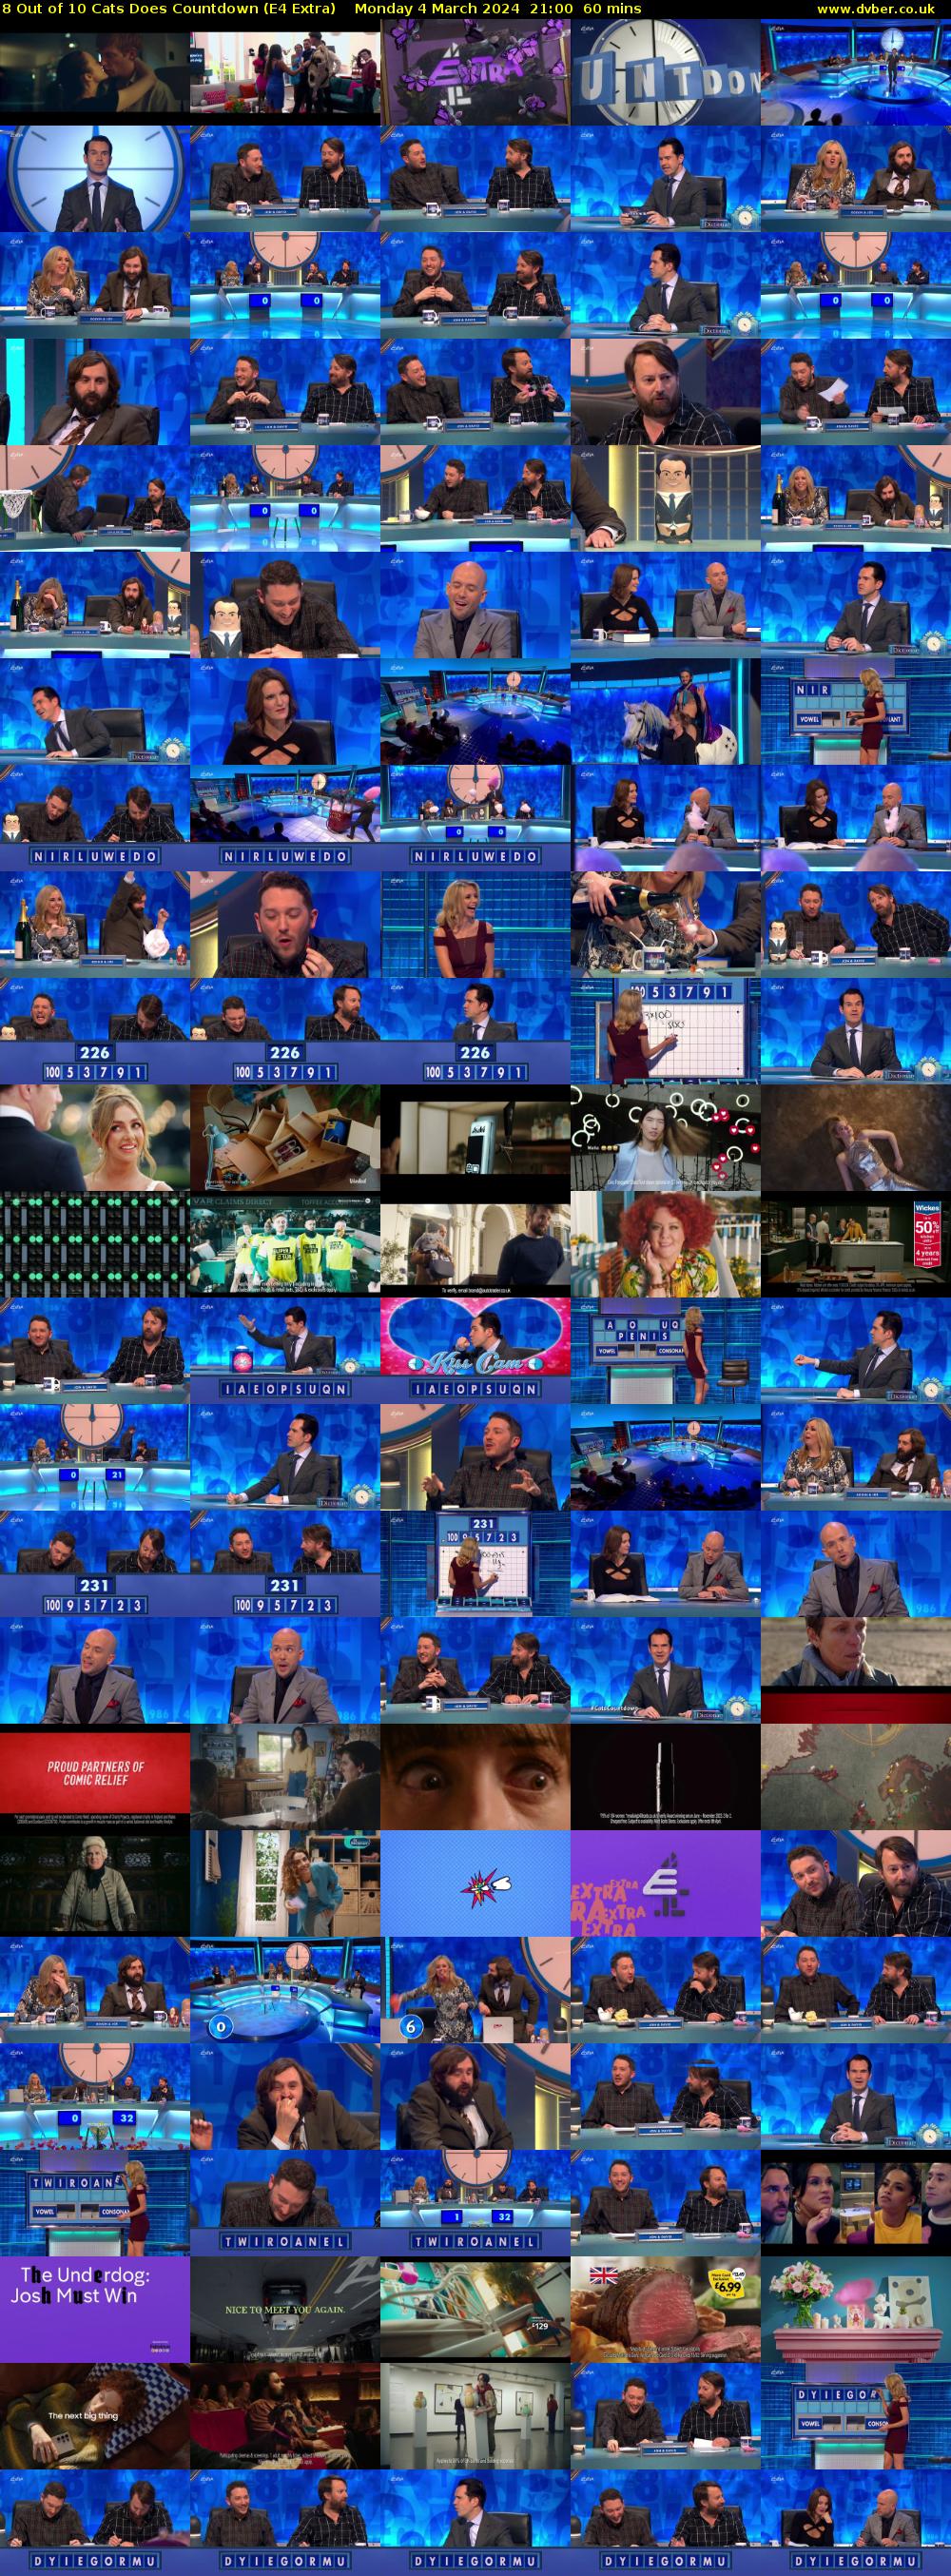 8 Out of 10 Cats Does Countdown (E4 Extra) Monday 4 March 2024 21:00 - 22:00